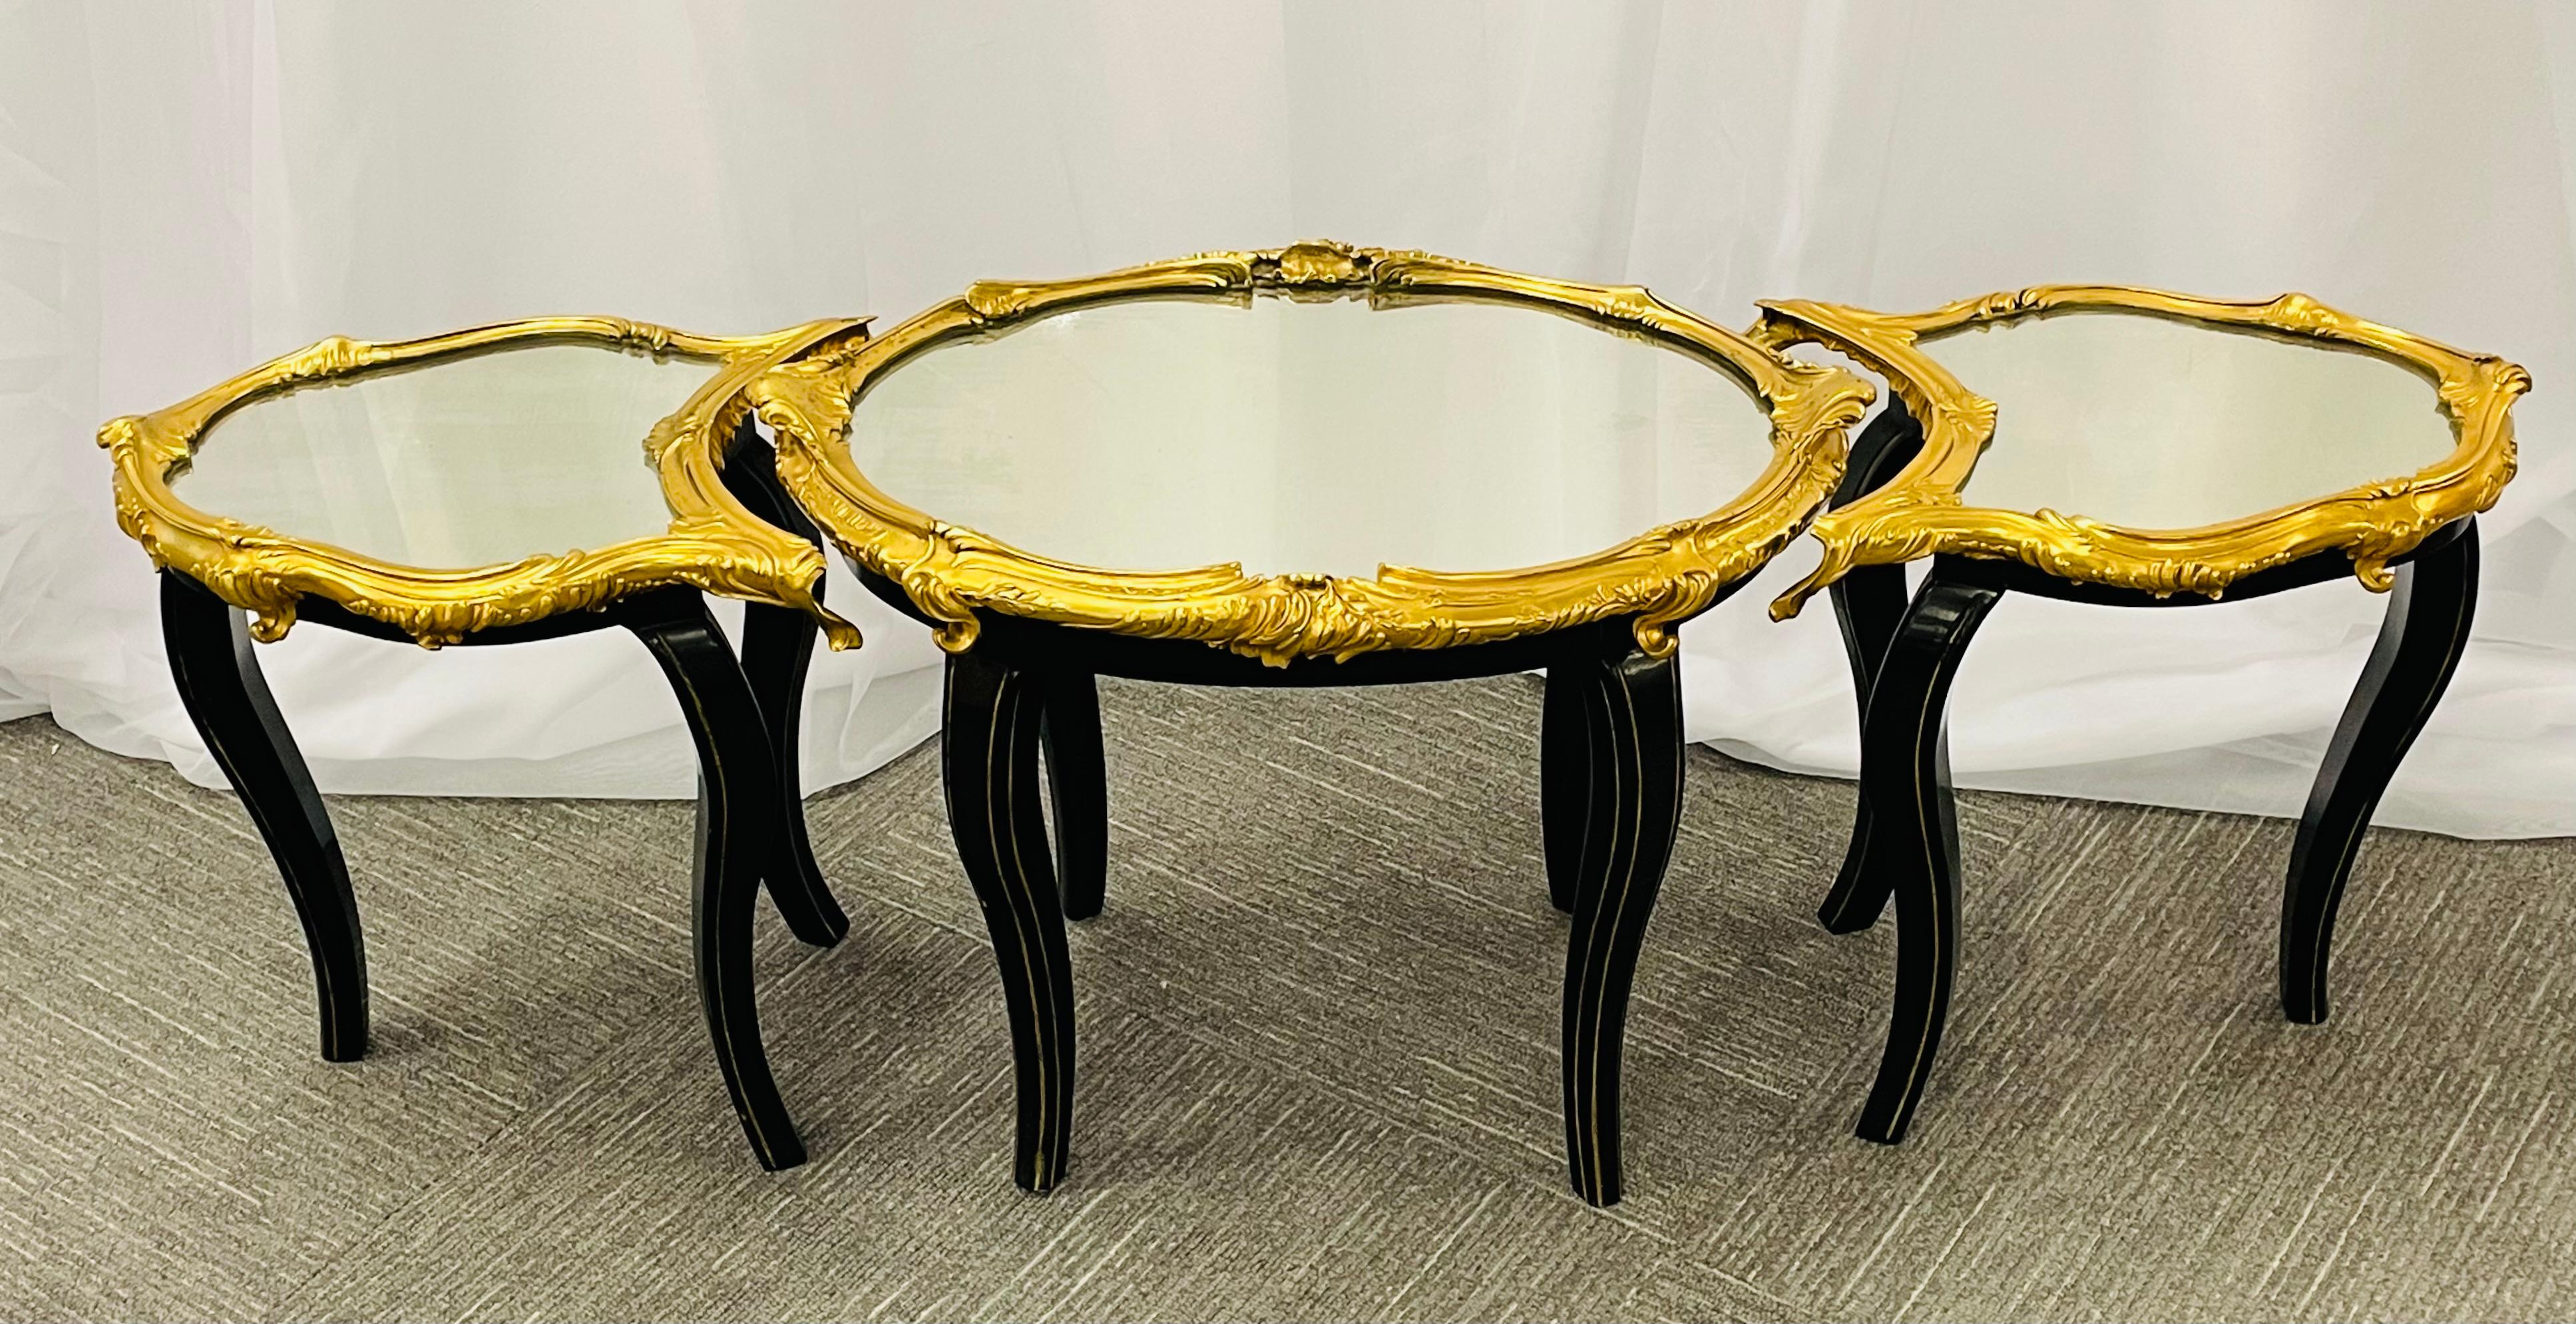 Maison Baguès Hollywood Regency coffee or low table. Ebony and bronze mounted. This is a stunning sleek and stylish coffee table having ebony legs on three-piece with a mirrored top set inside the finest bronze mountings. Can be use together as a